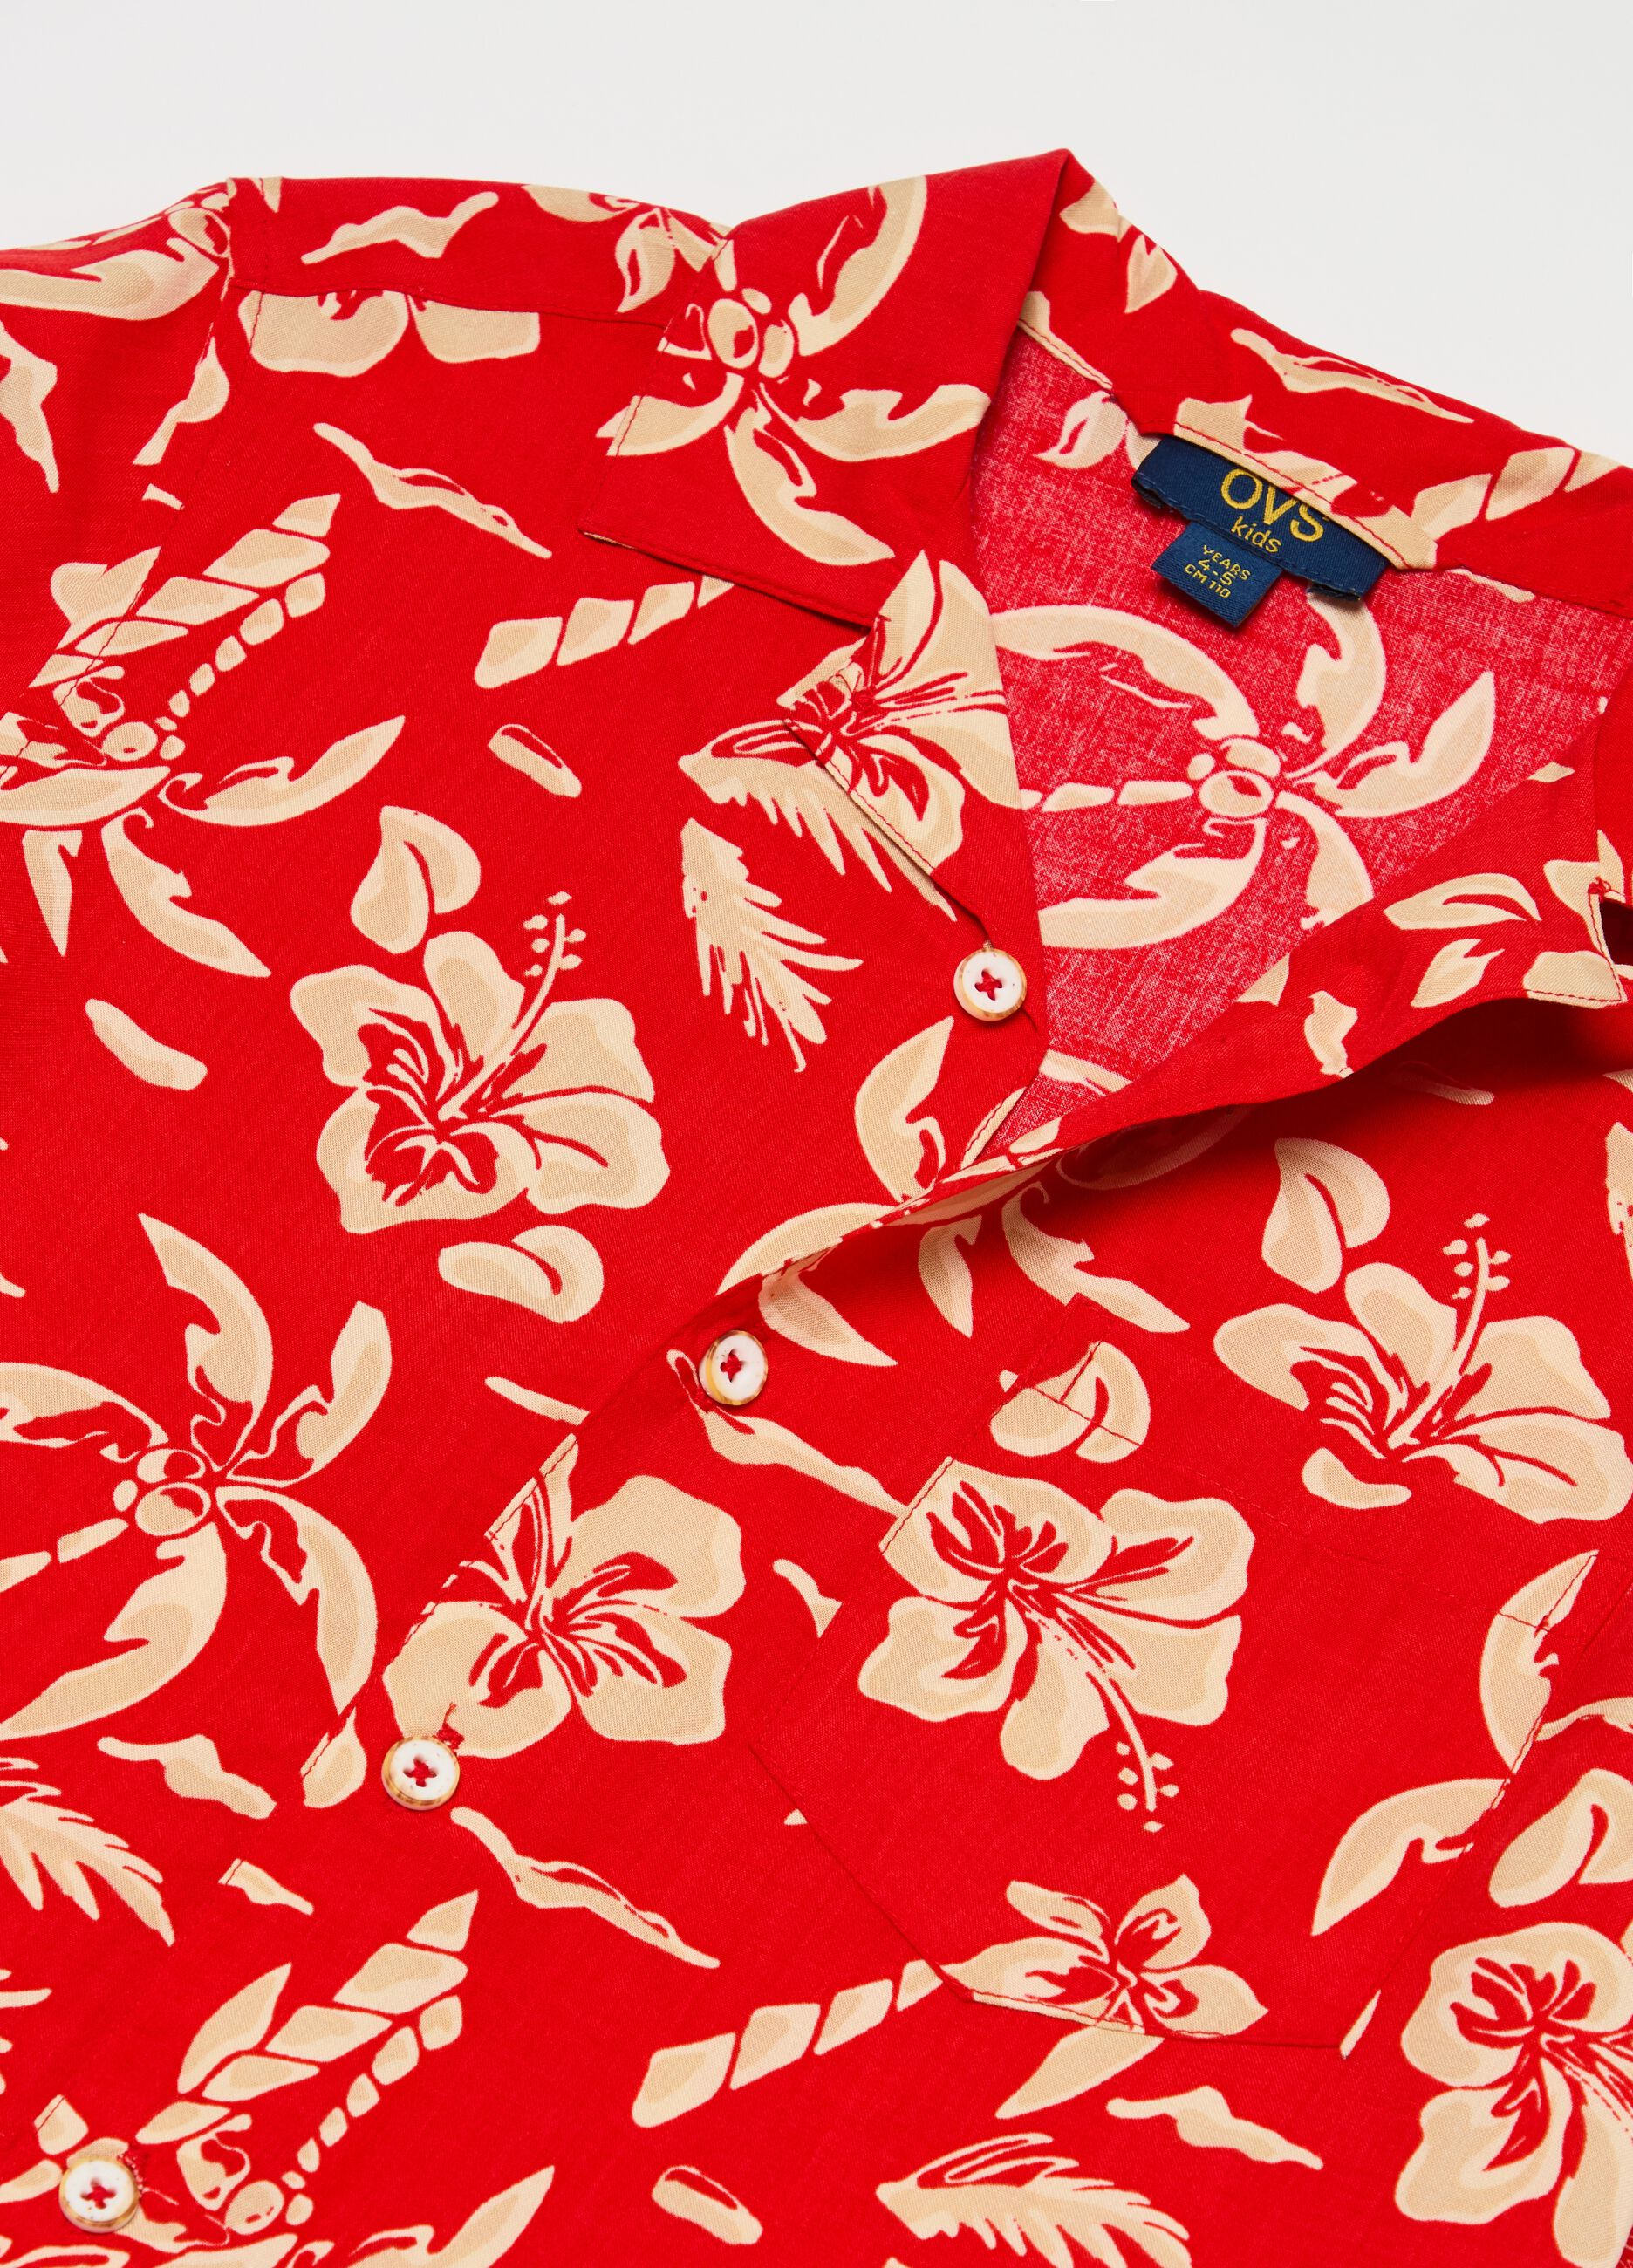 Short-sleeved shirt with tropical flowers print